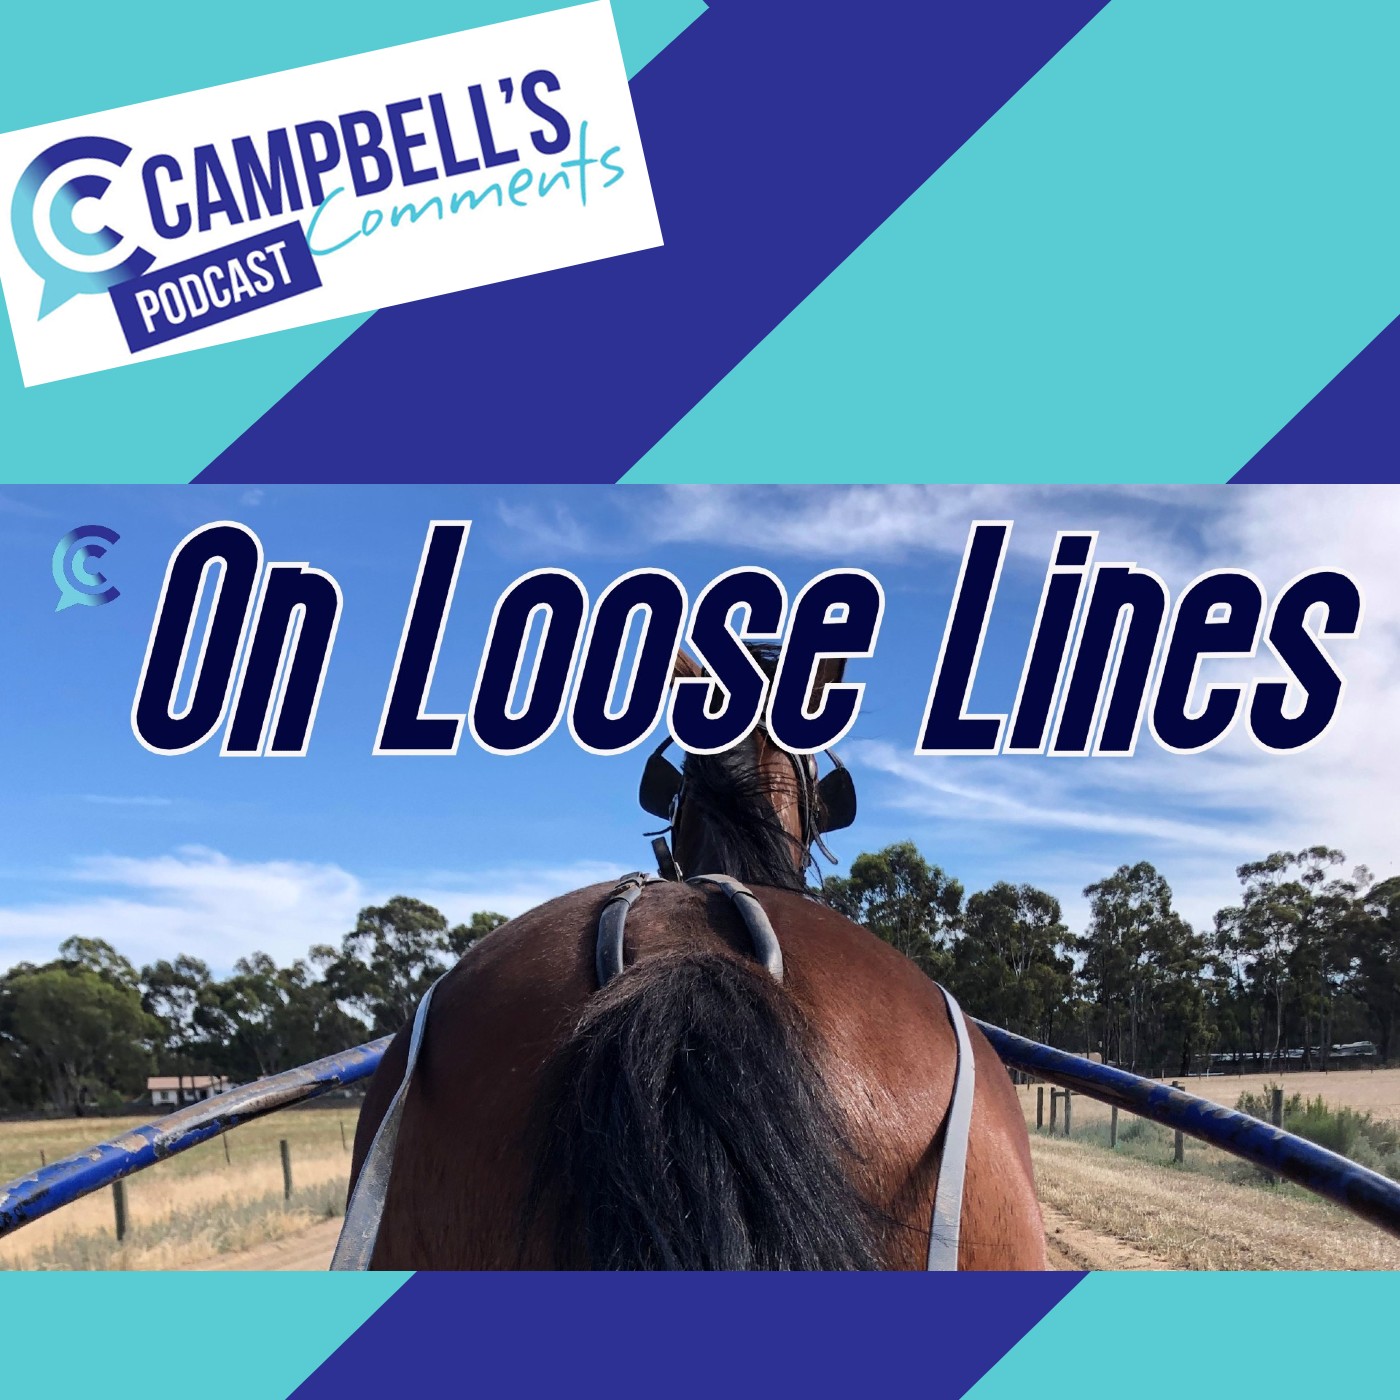 You are currently viewing 251: Campbells Comments On Loose Lines Live